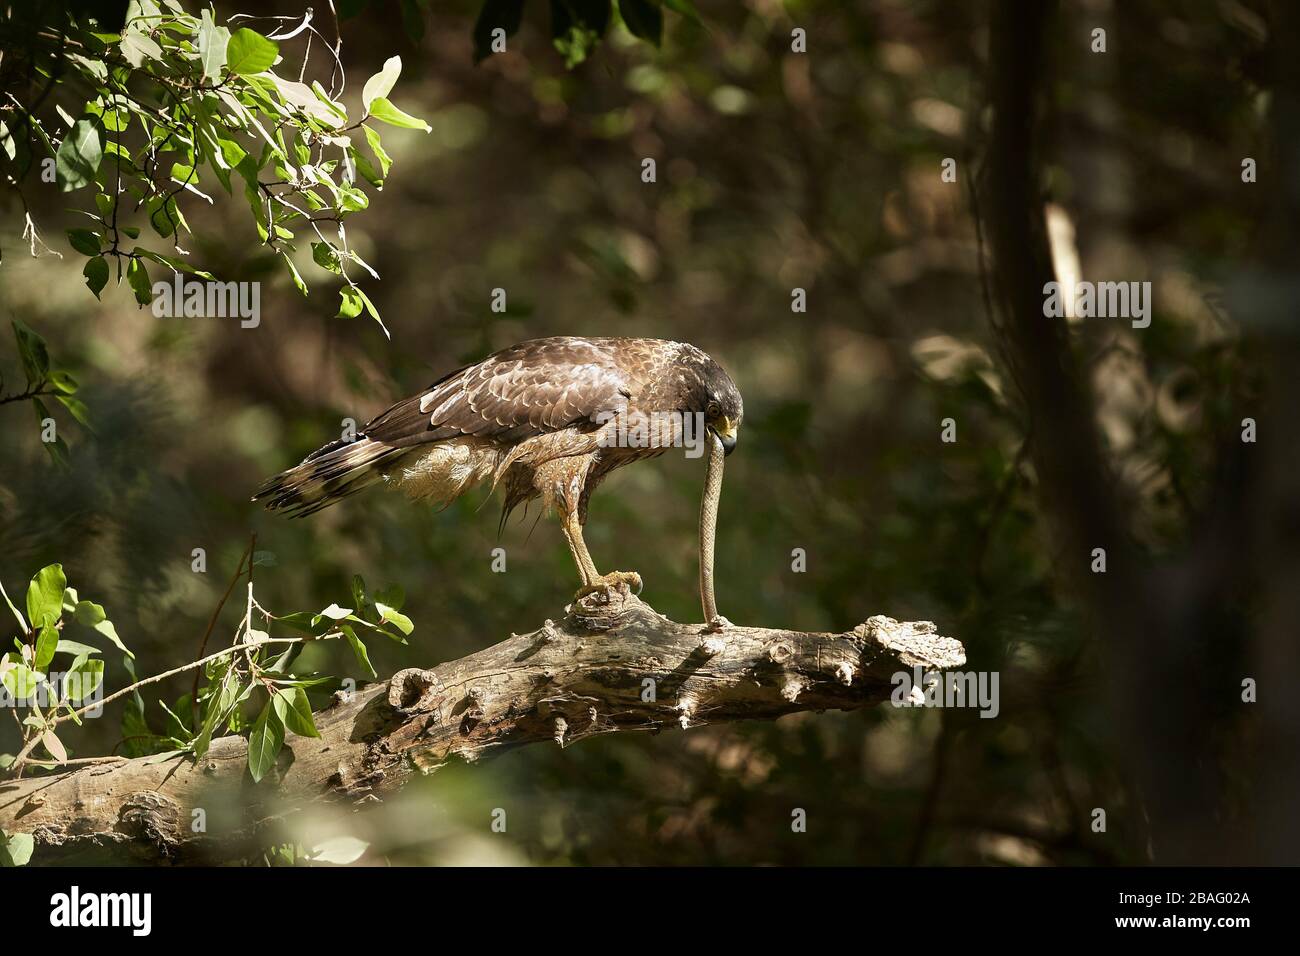 The crested serpent eagle feeding on a snake, at Ranthambhore forest, India. Stock Photo